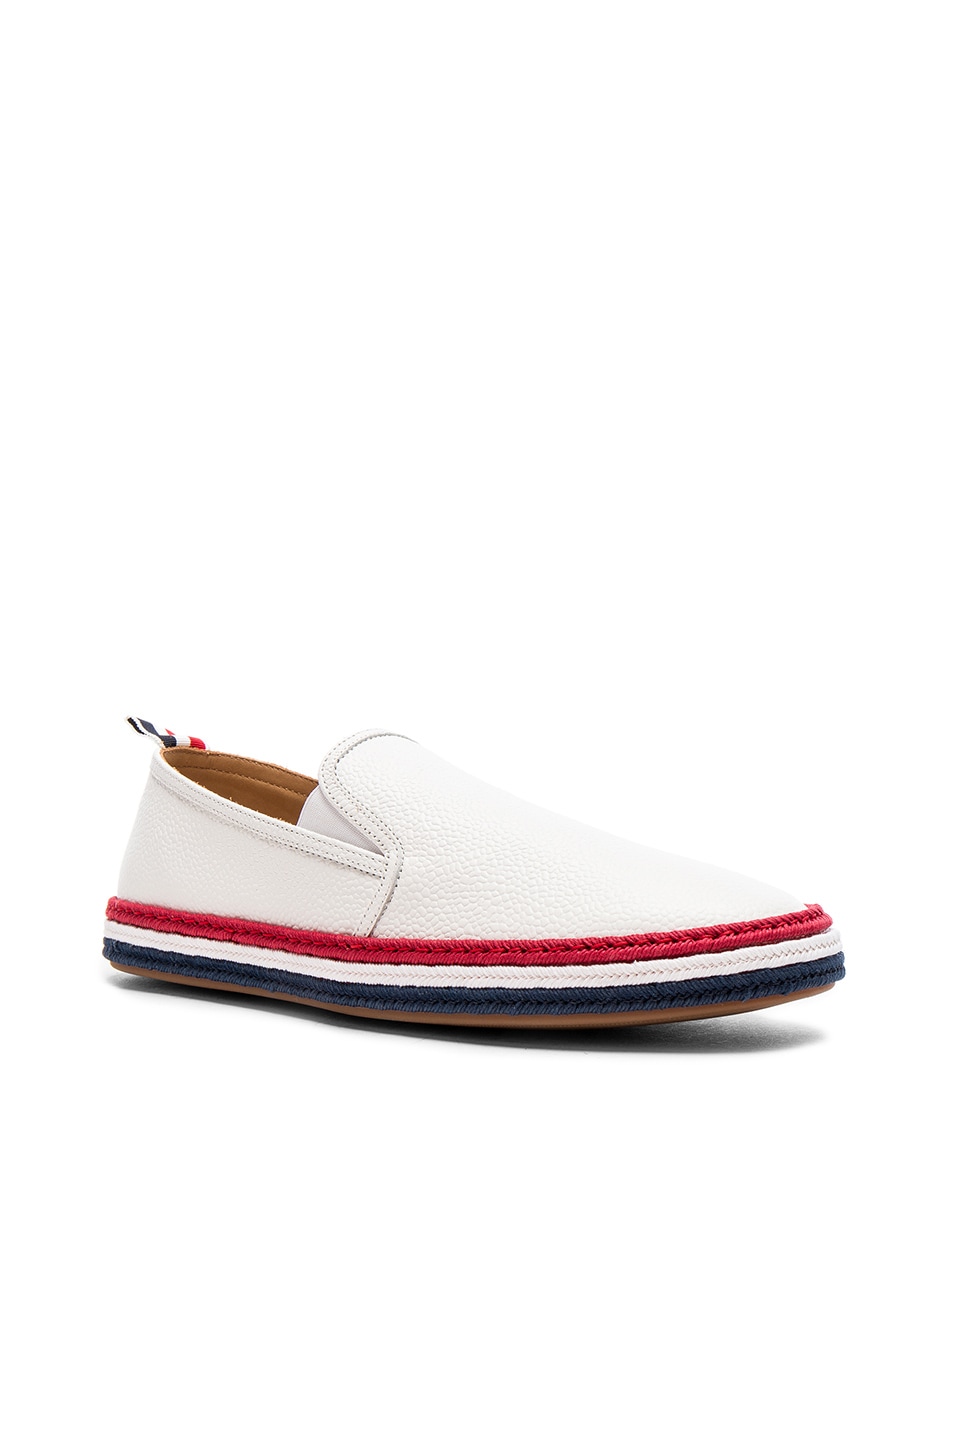 Image 1 of Thom Browne Pebble Grain Leather Espadrilles in White